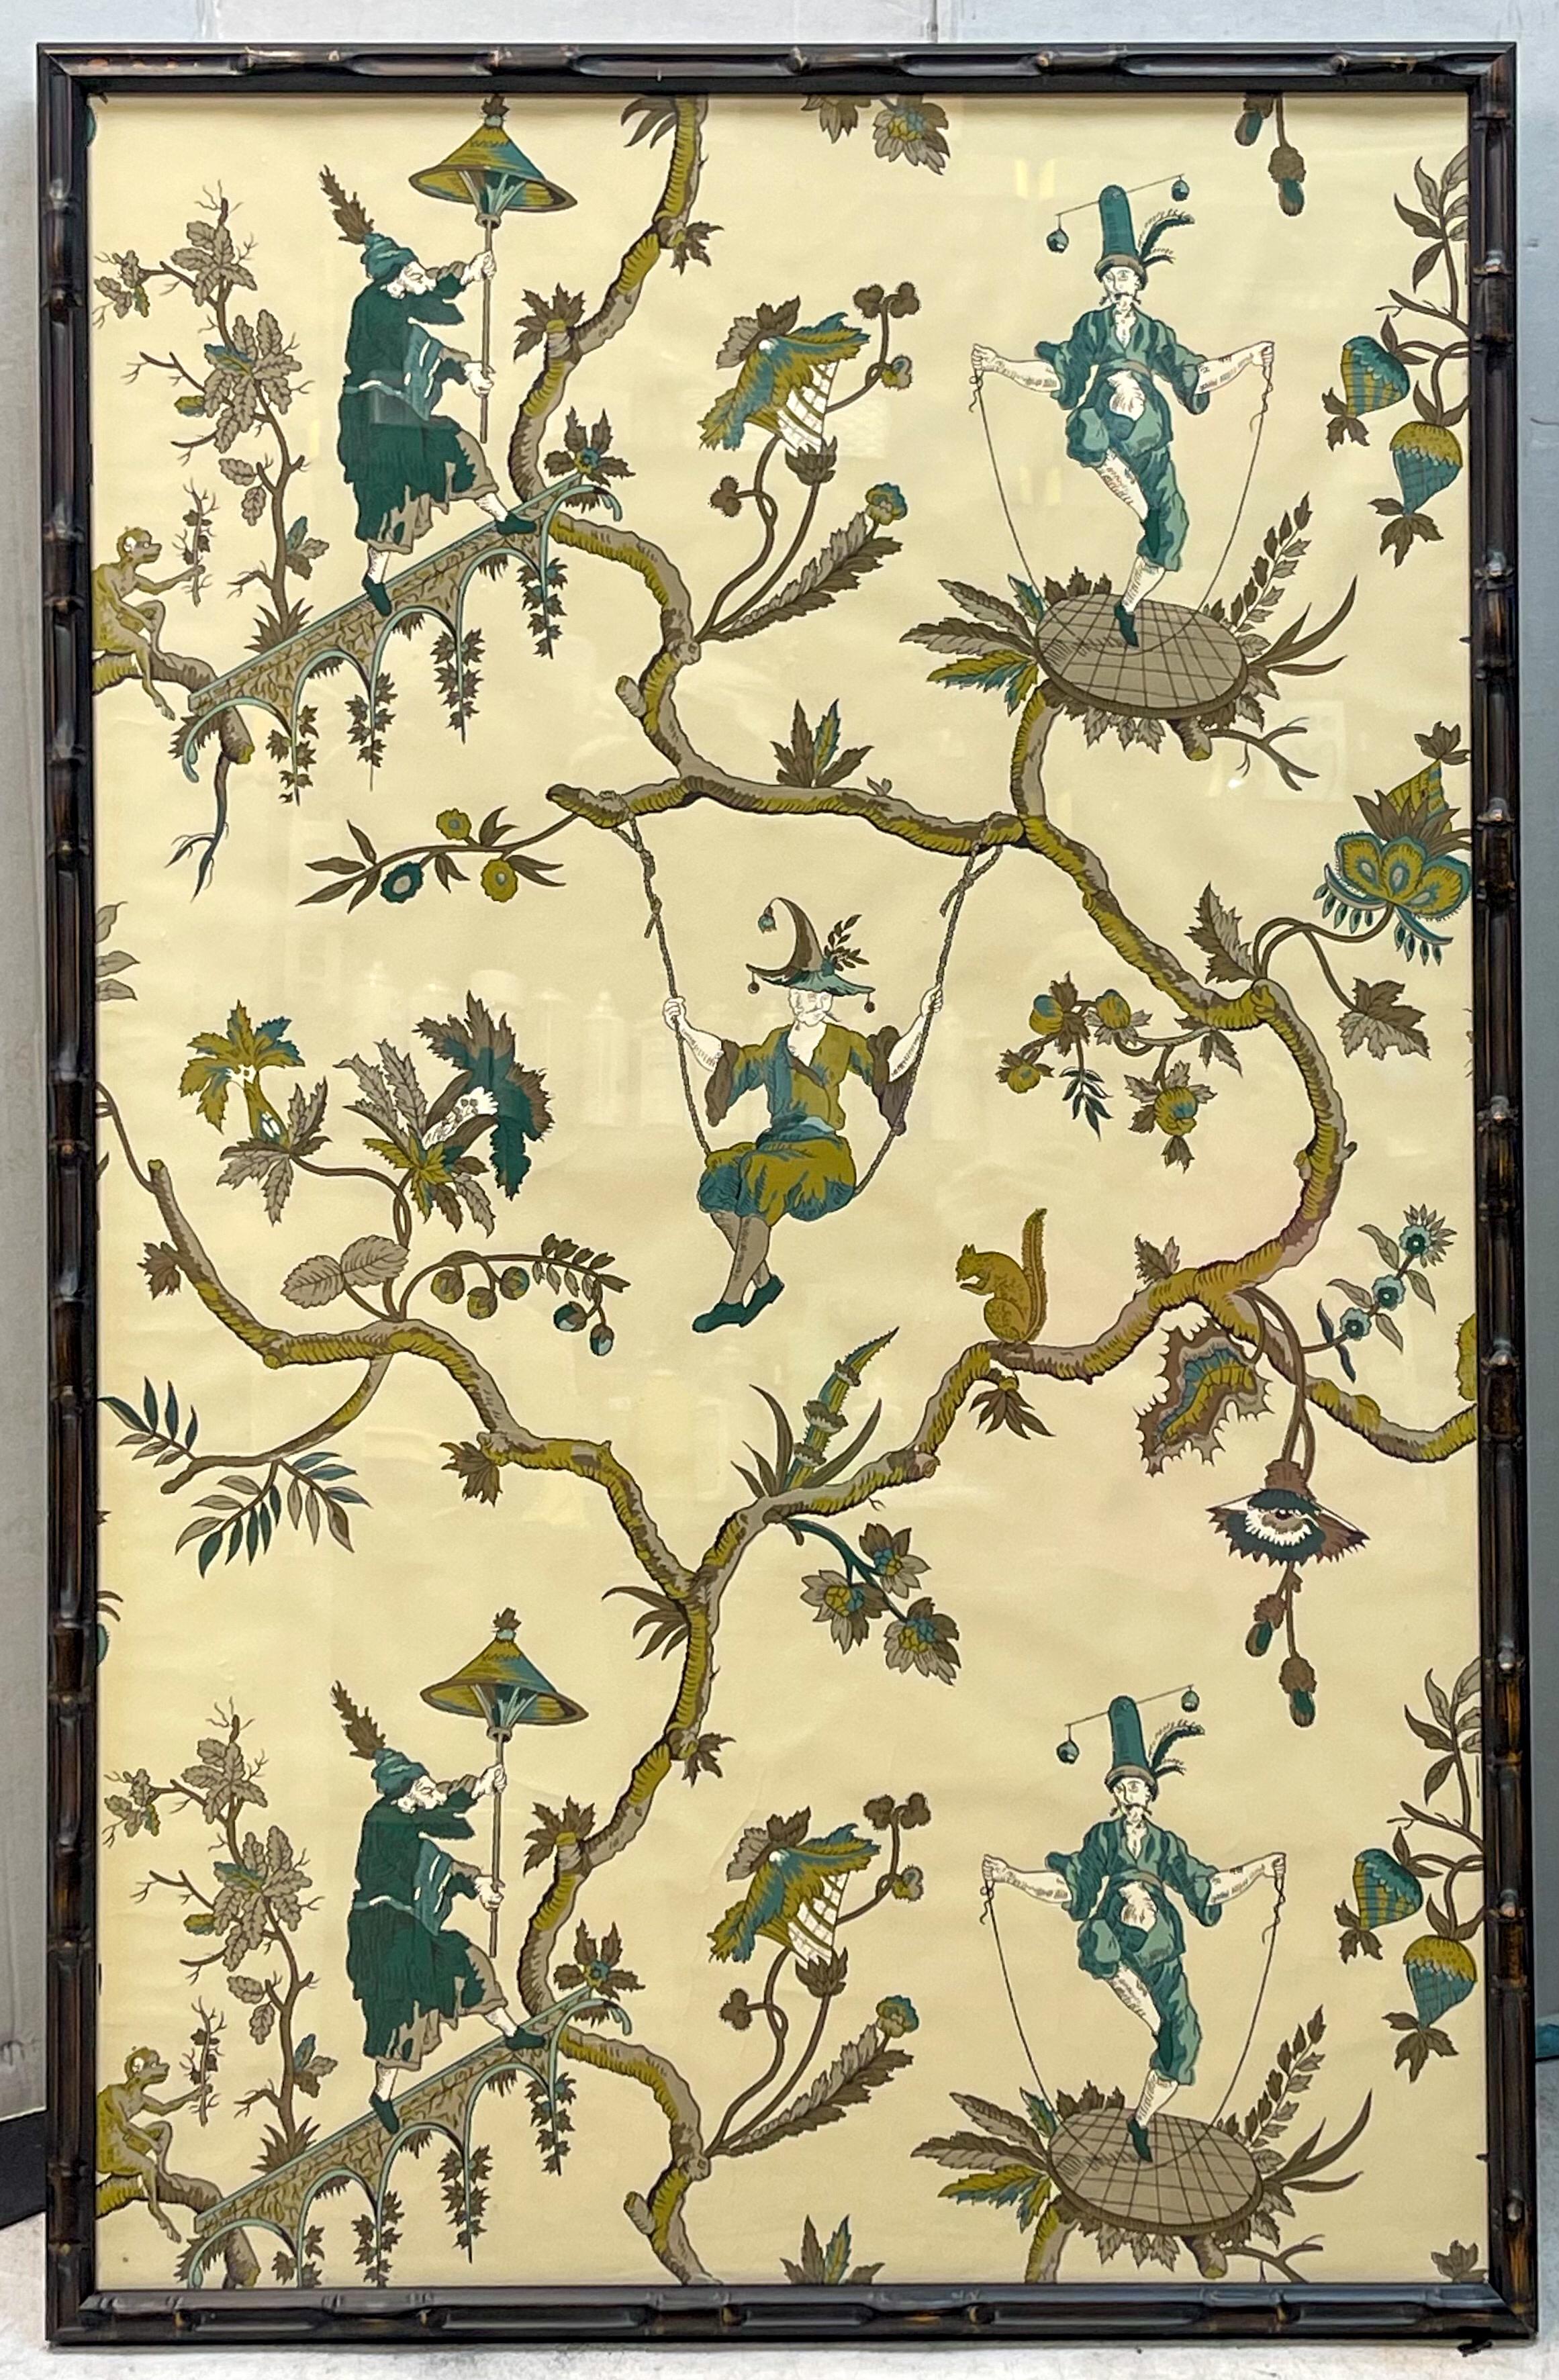 These are special! I had this wonderful roll of hand painted French chinoiserie wall paper by AL. Diament & Co. This is the country’s oldest design firm established in Philadelphia in 1855. They still produce wall paper today. I had these framed in